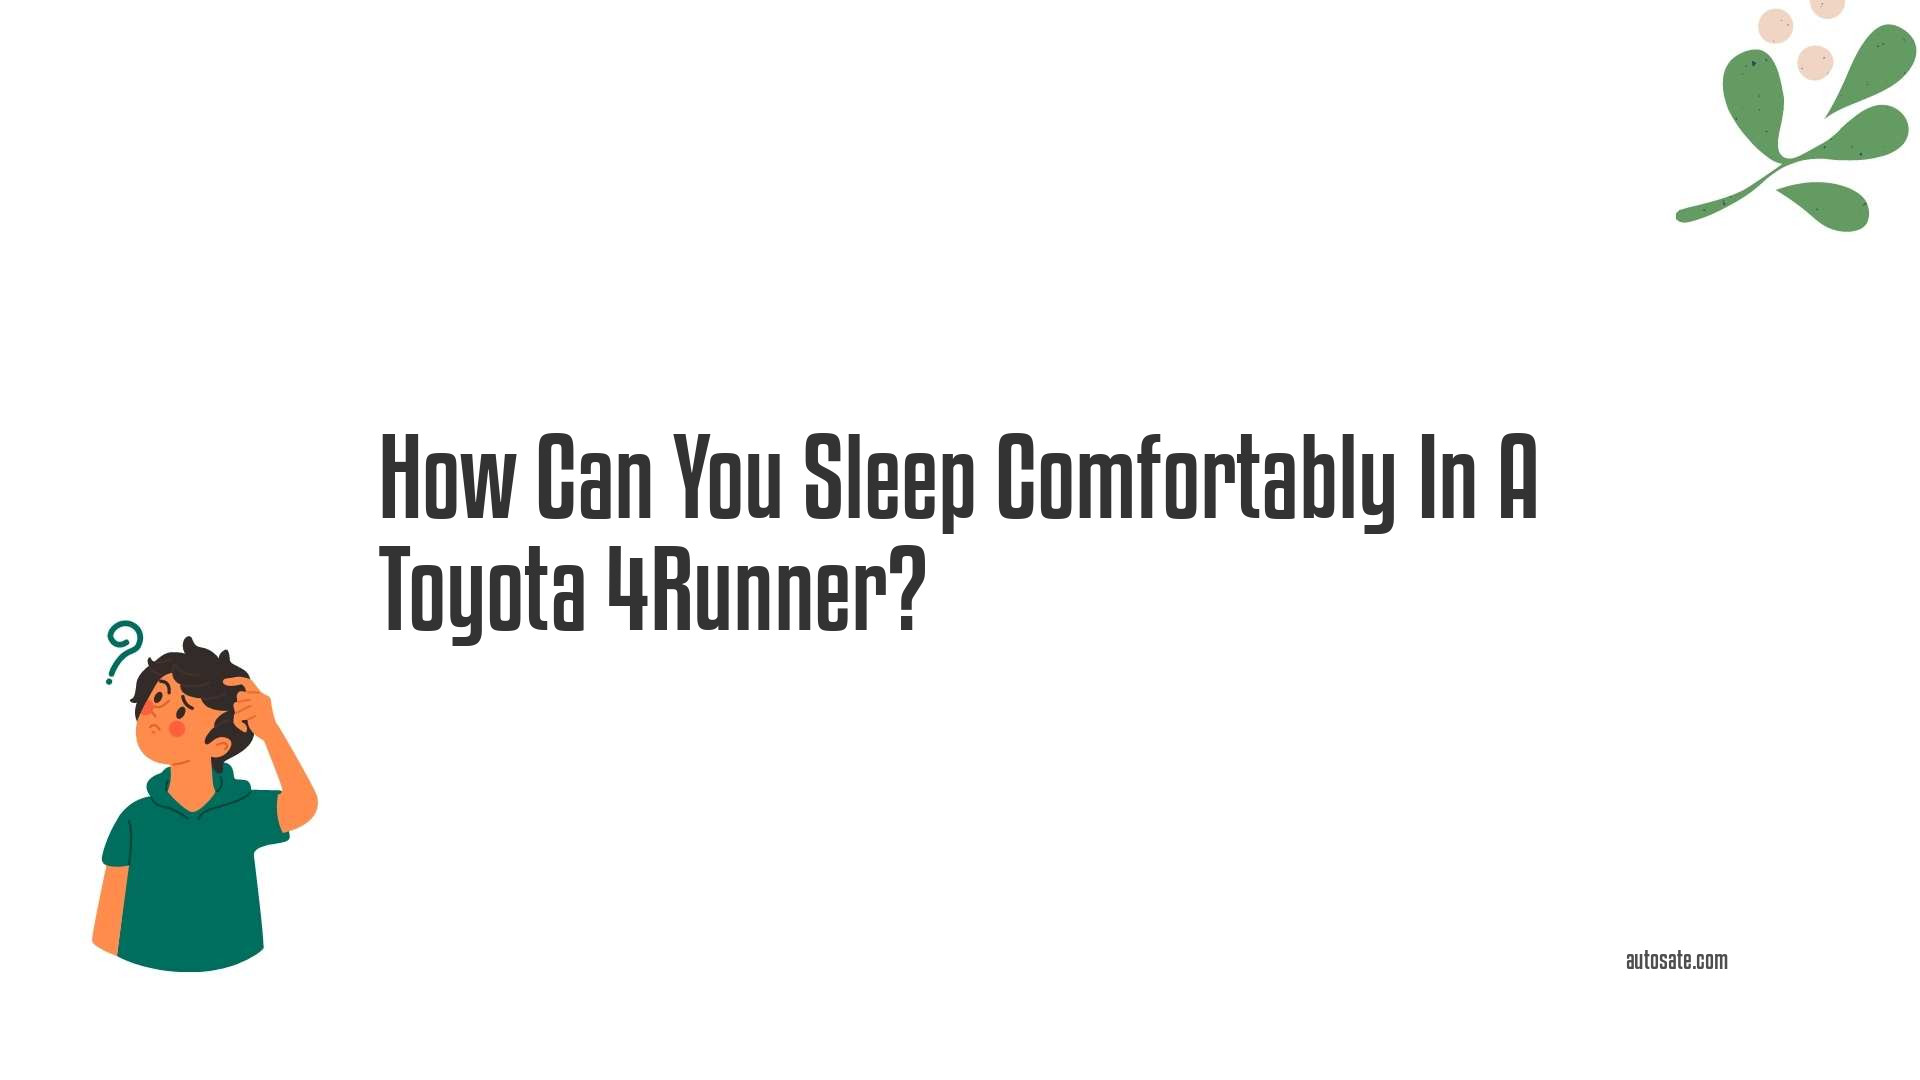 How Can You Sleep Comfortably In A Toyota 4Runner?